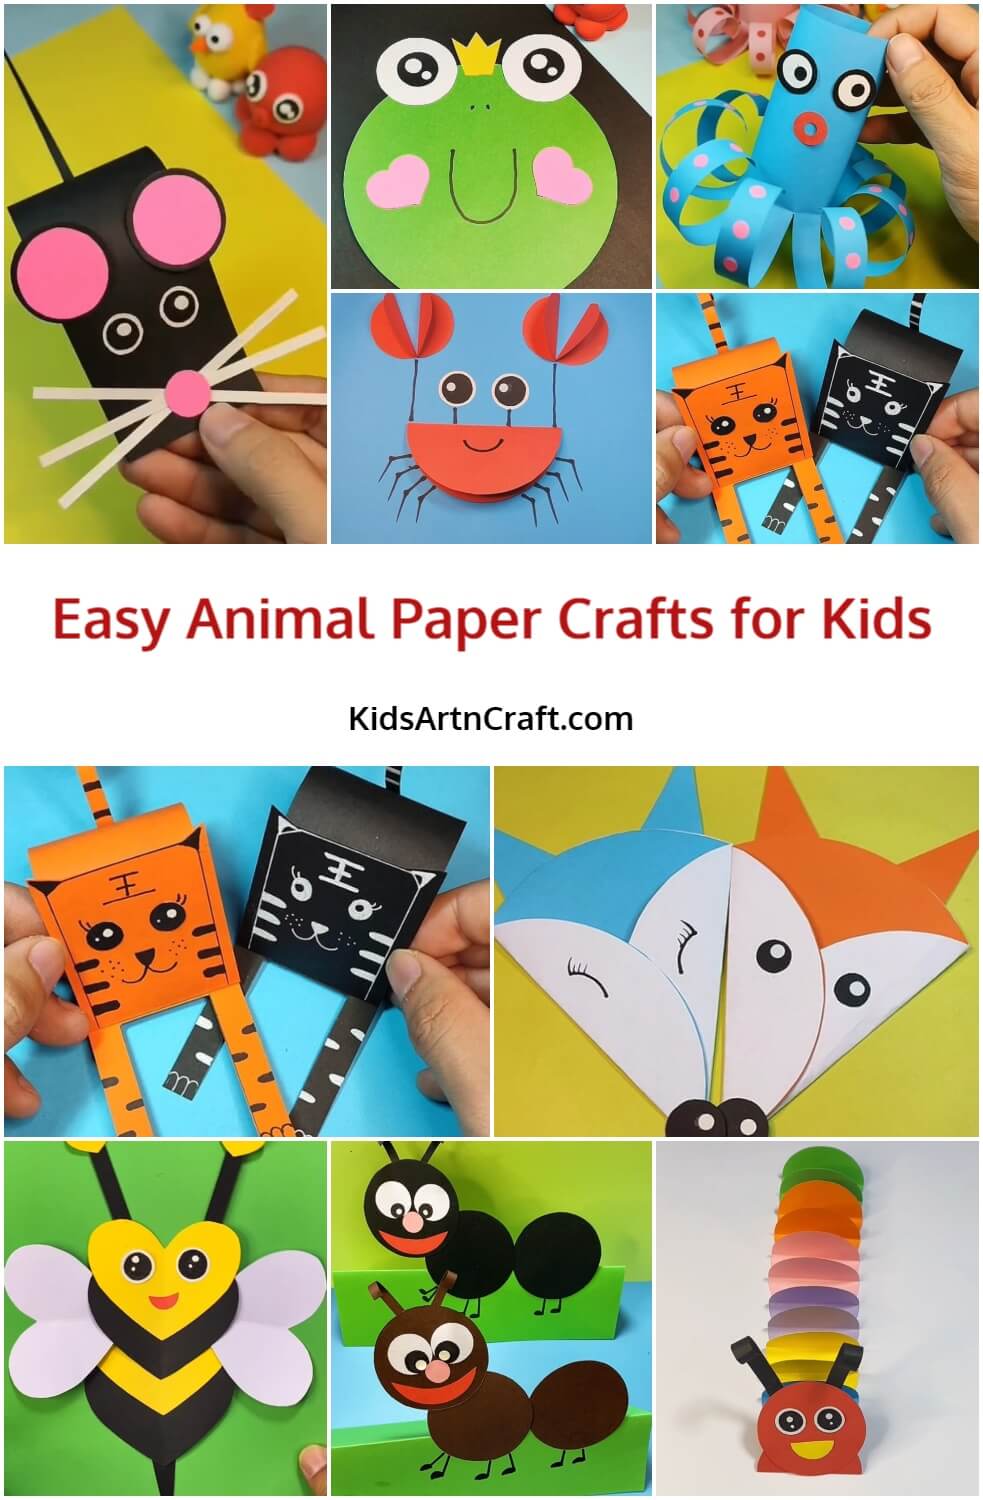 Easy Animal Paper Crafts for Kids